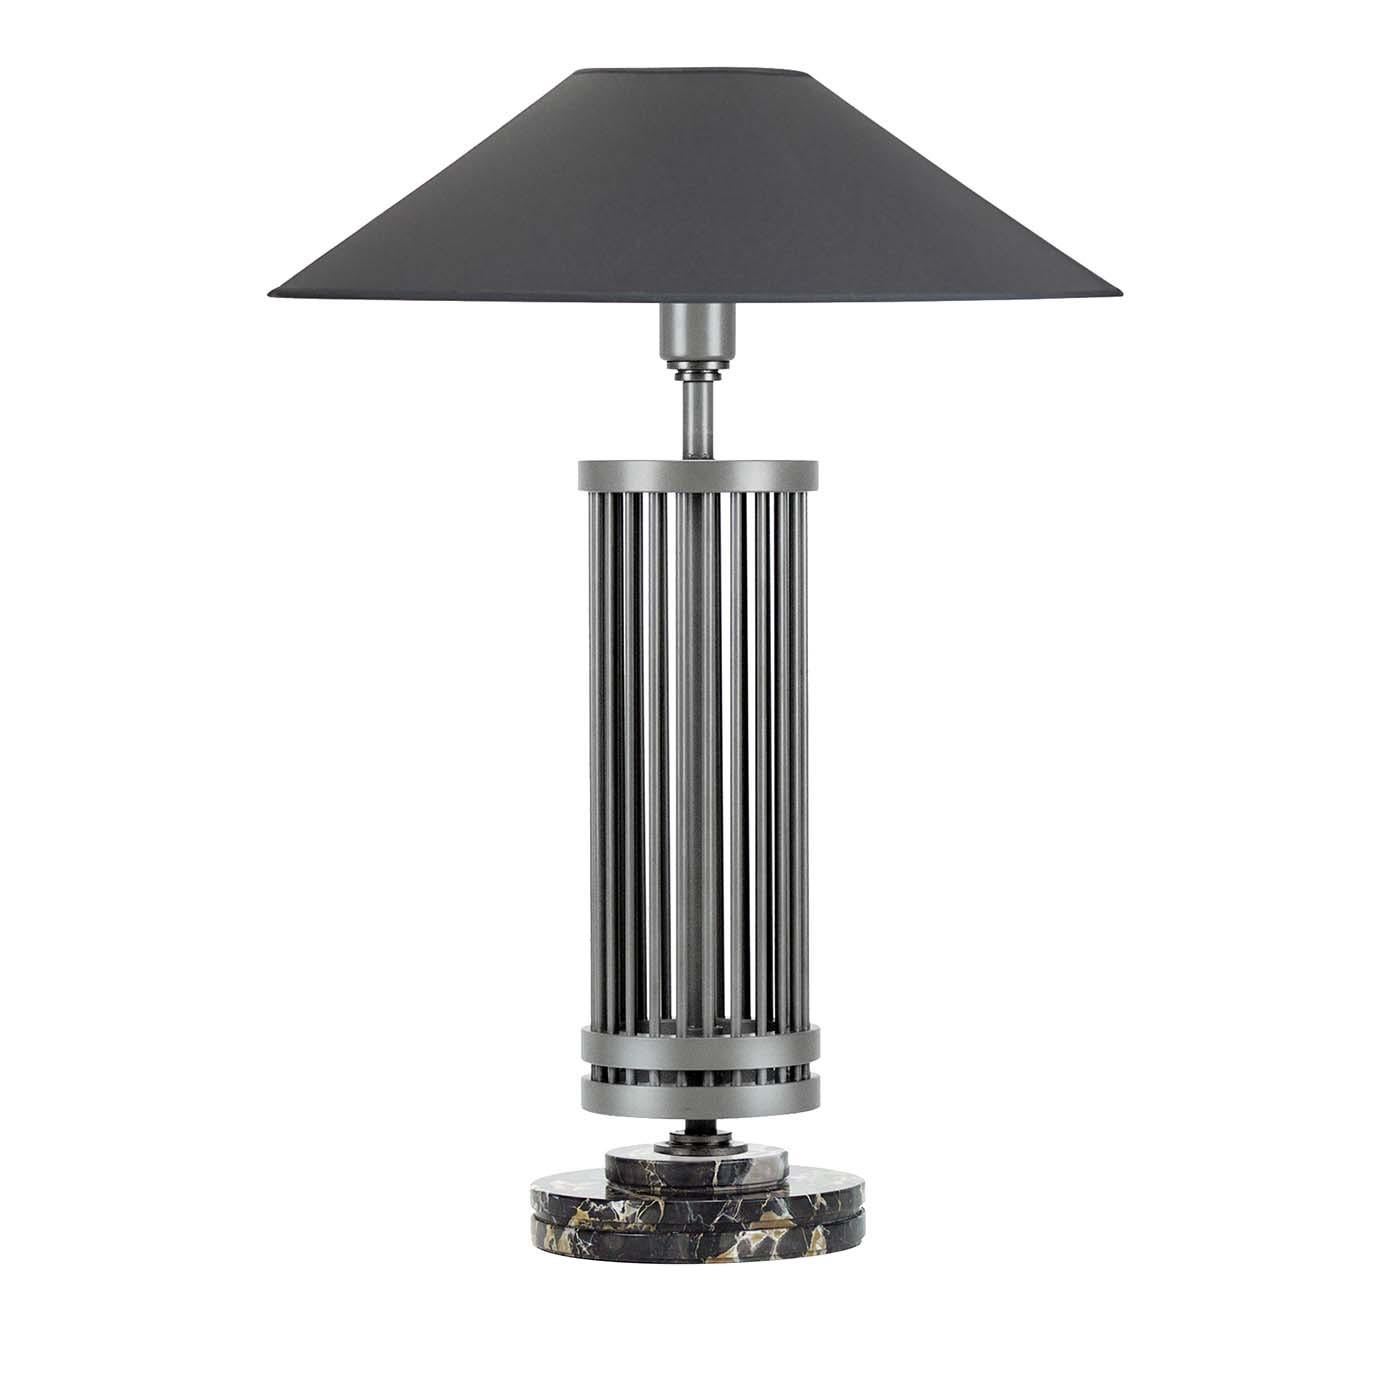 A stunning focal point in any interior, this refined table lamp has a distinctive timeless style. The pagoda-shaped shade in dark gray silk complements the column-style structure composed of a series of vertical steel rods positioned between two